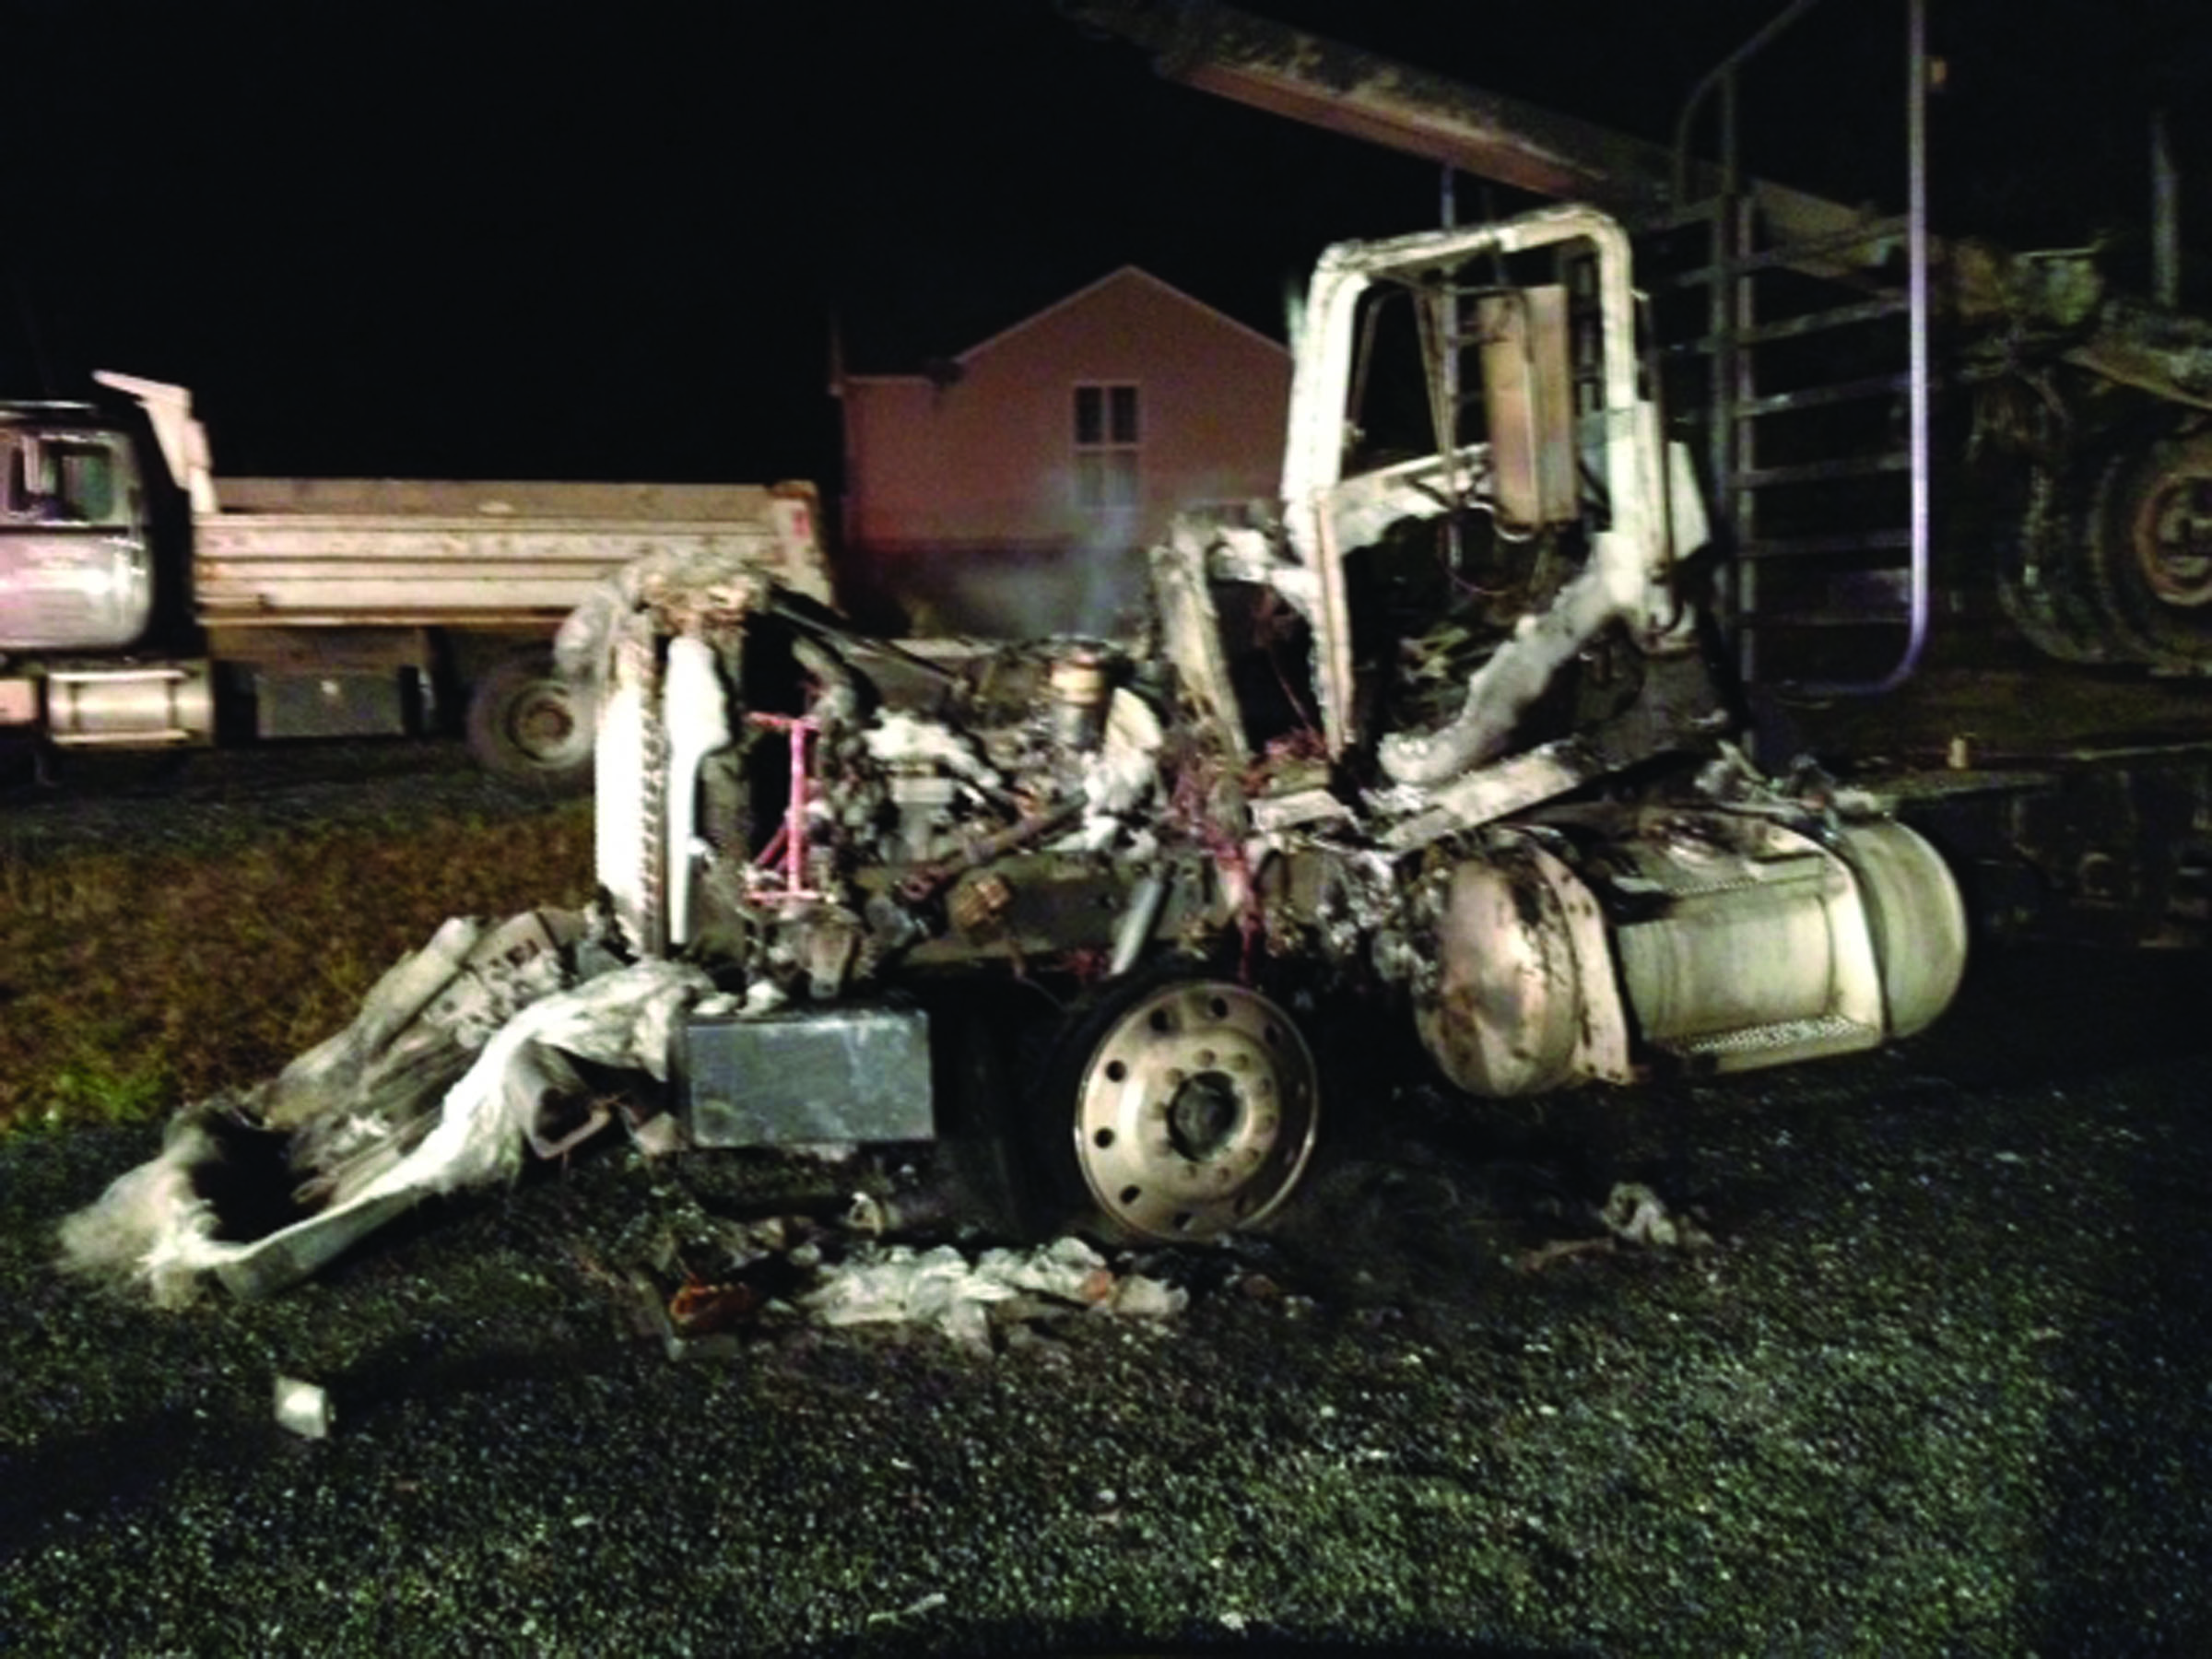 This logging truck was destroyed by fire shortly after midnight Monday in Port Angeles. Clallam County Fire District No. 2